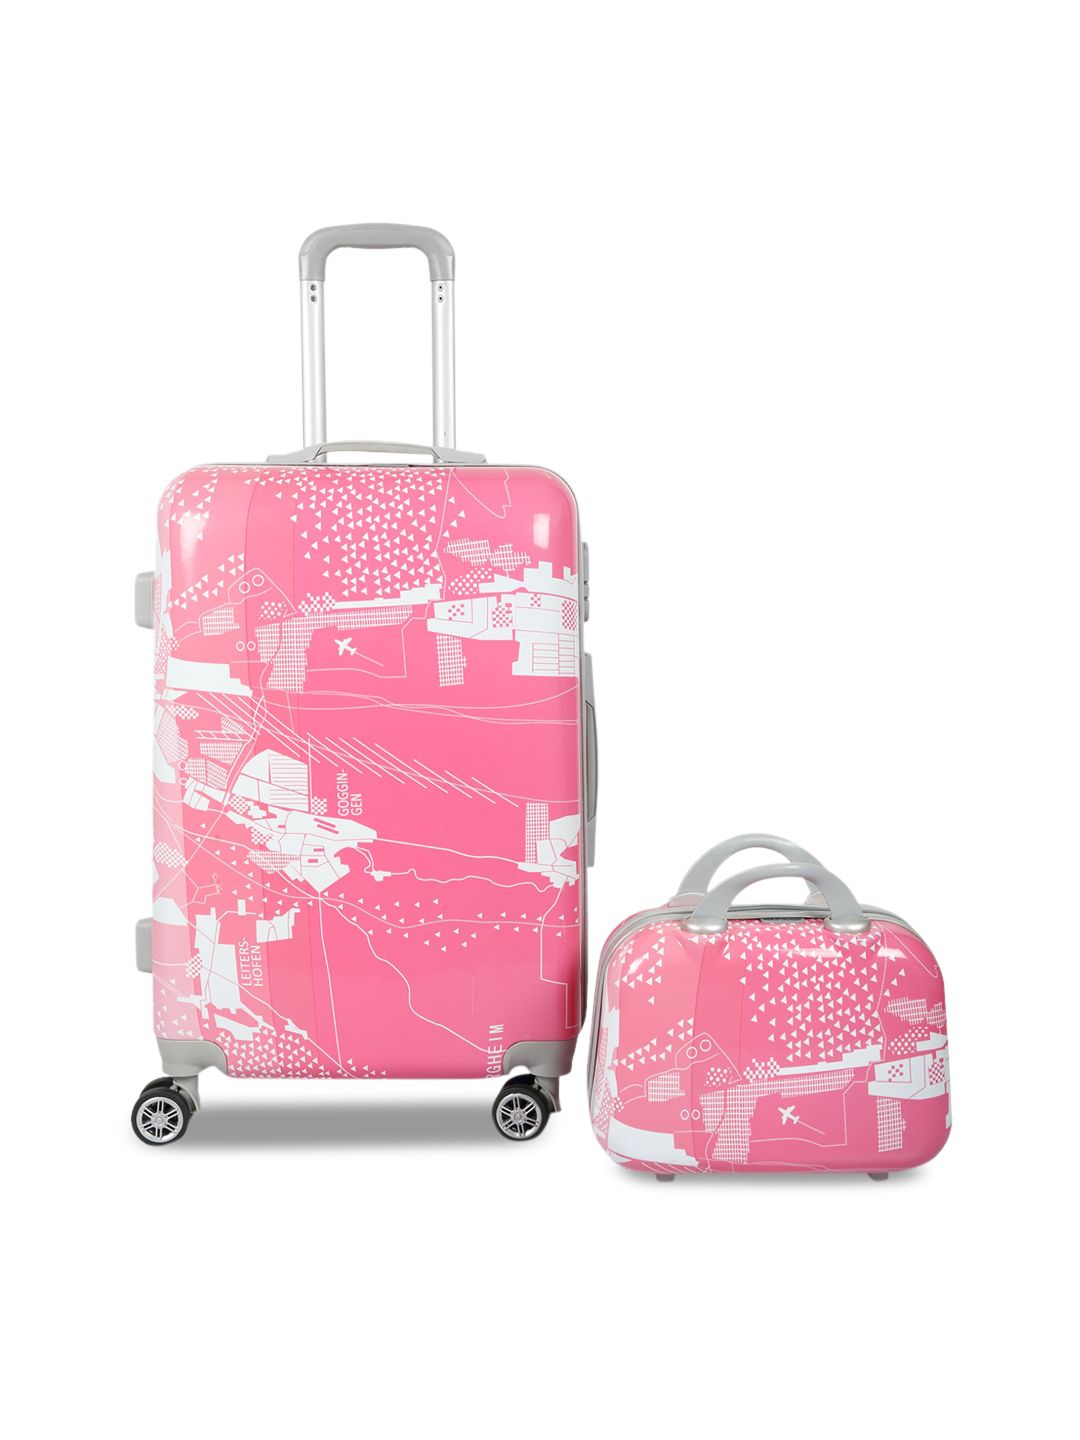 Polo Class Unisex Set Of 2 Pink & White Printed Trolley & Vanity Bags Price in India